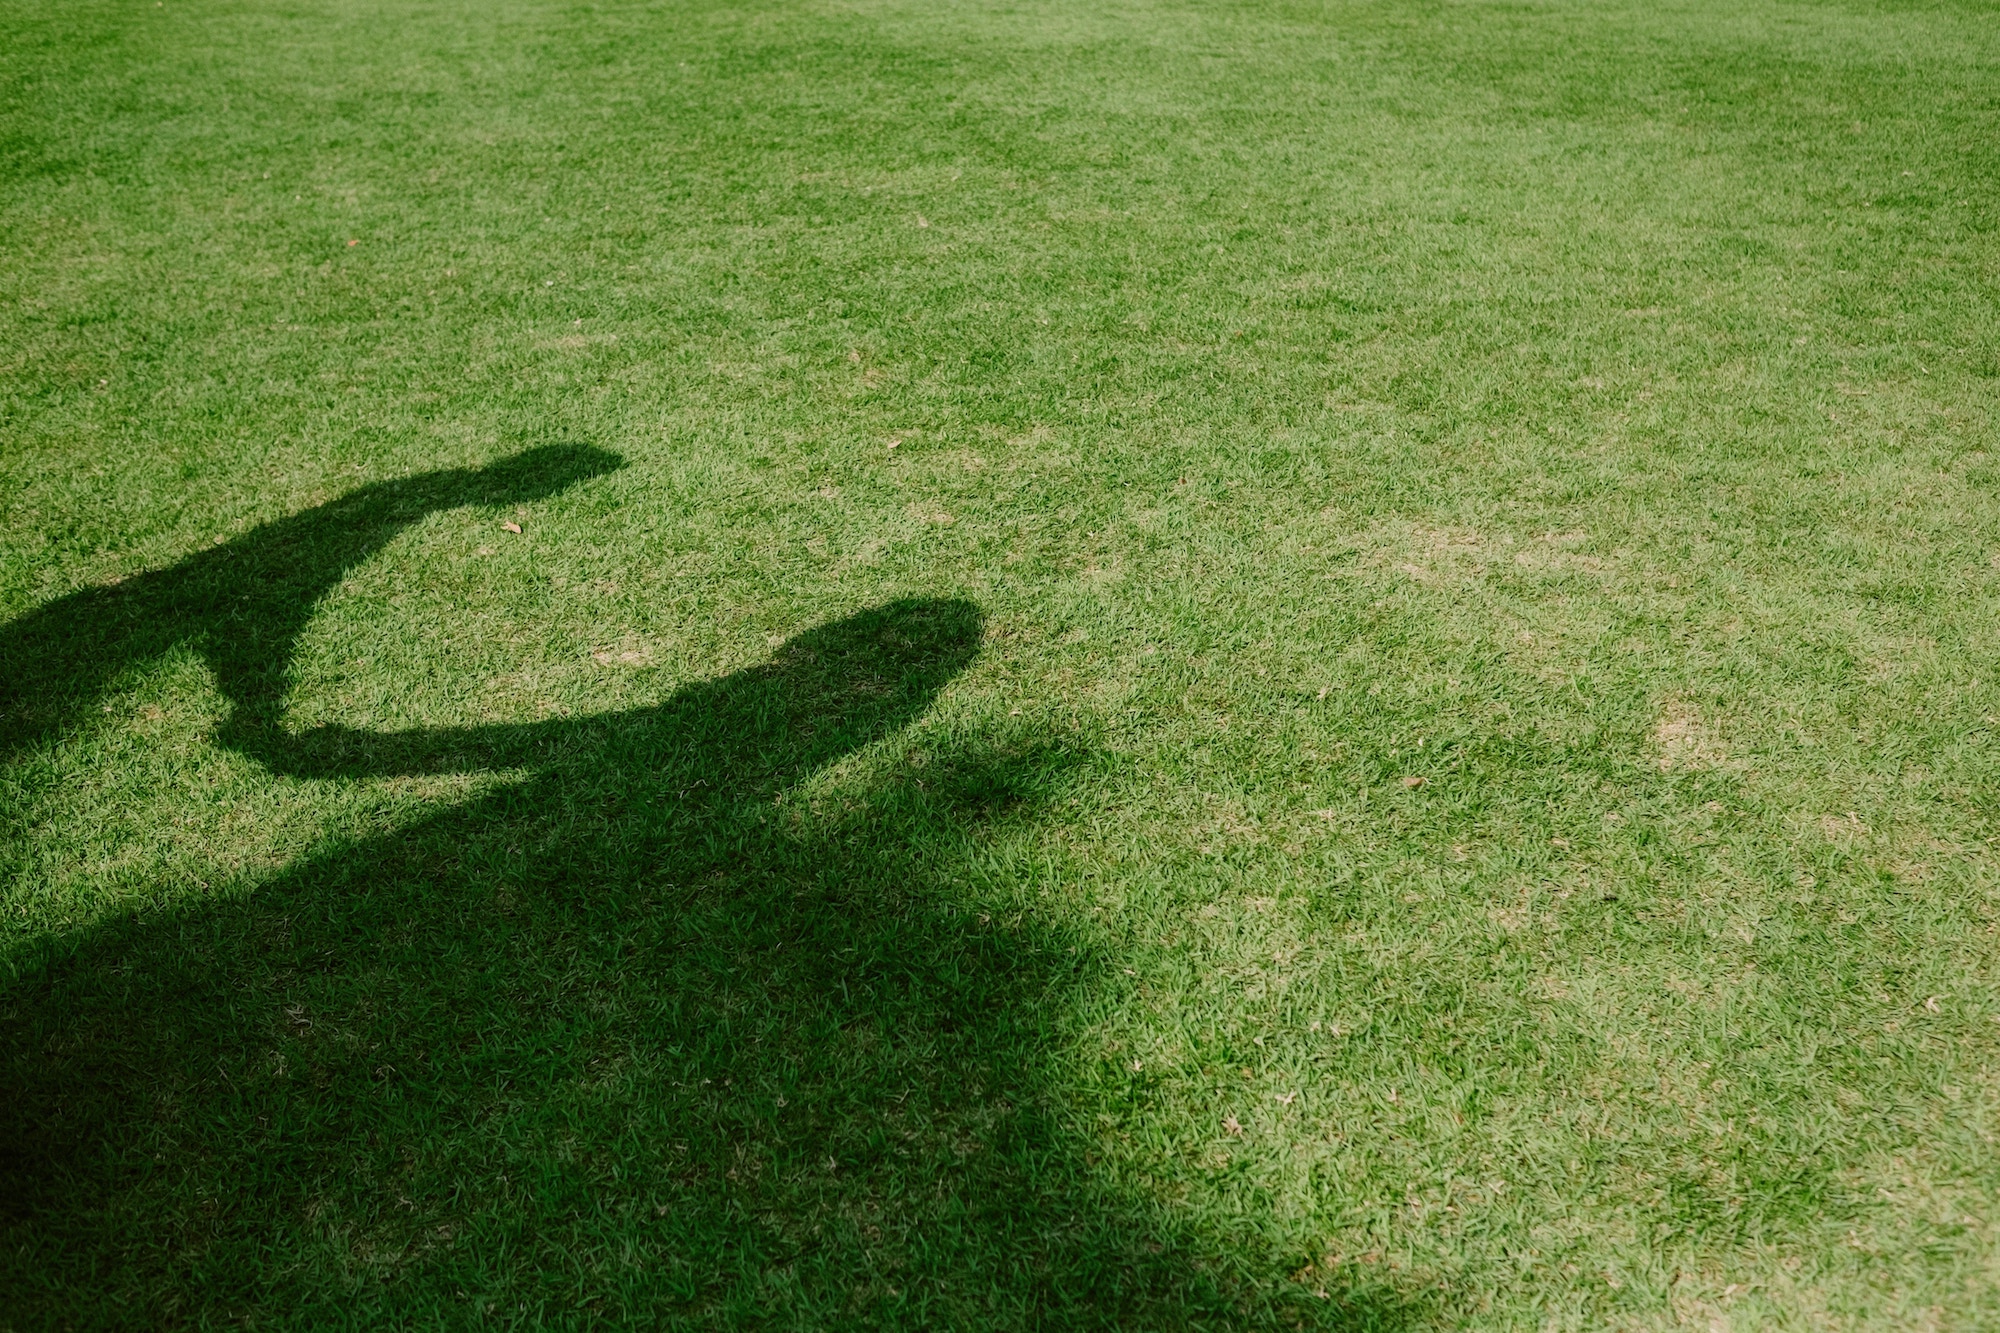 Shadow of two people shaking hands on a green lawn